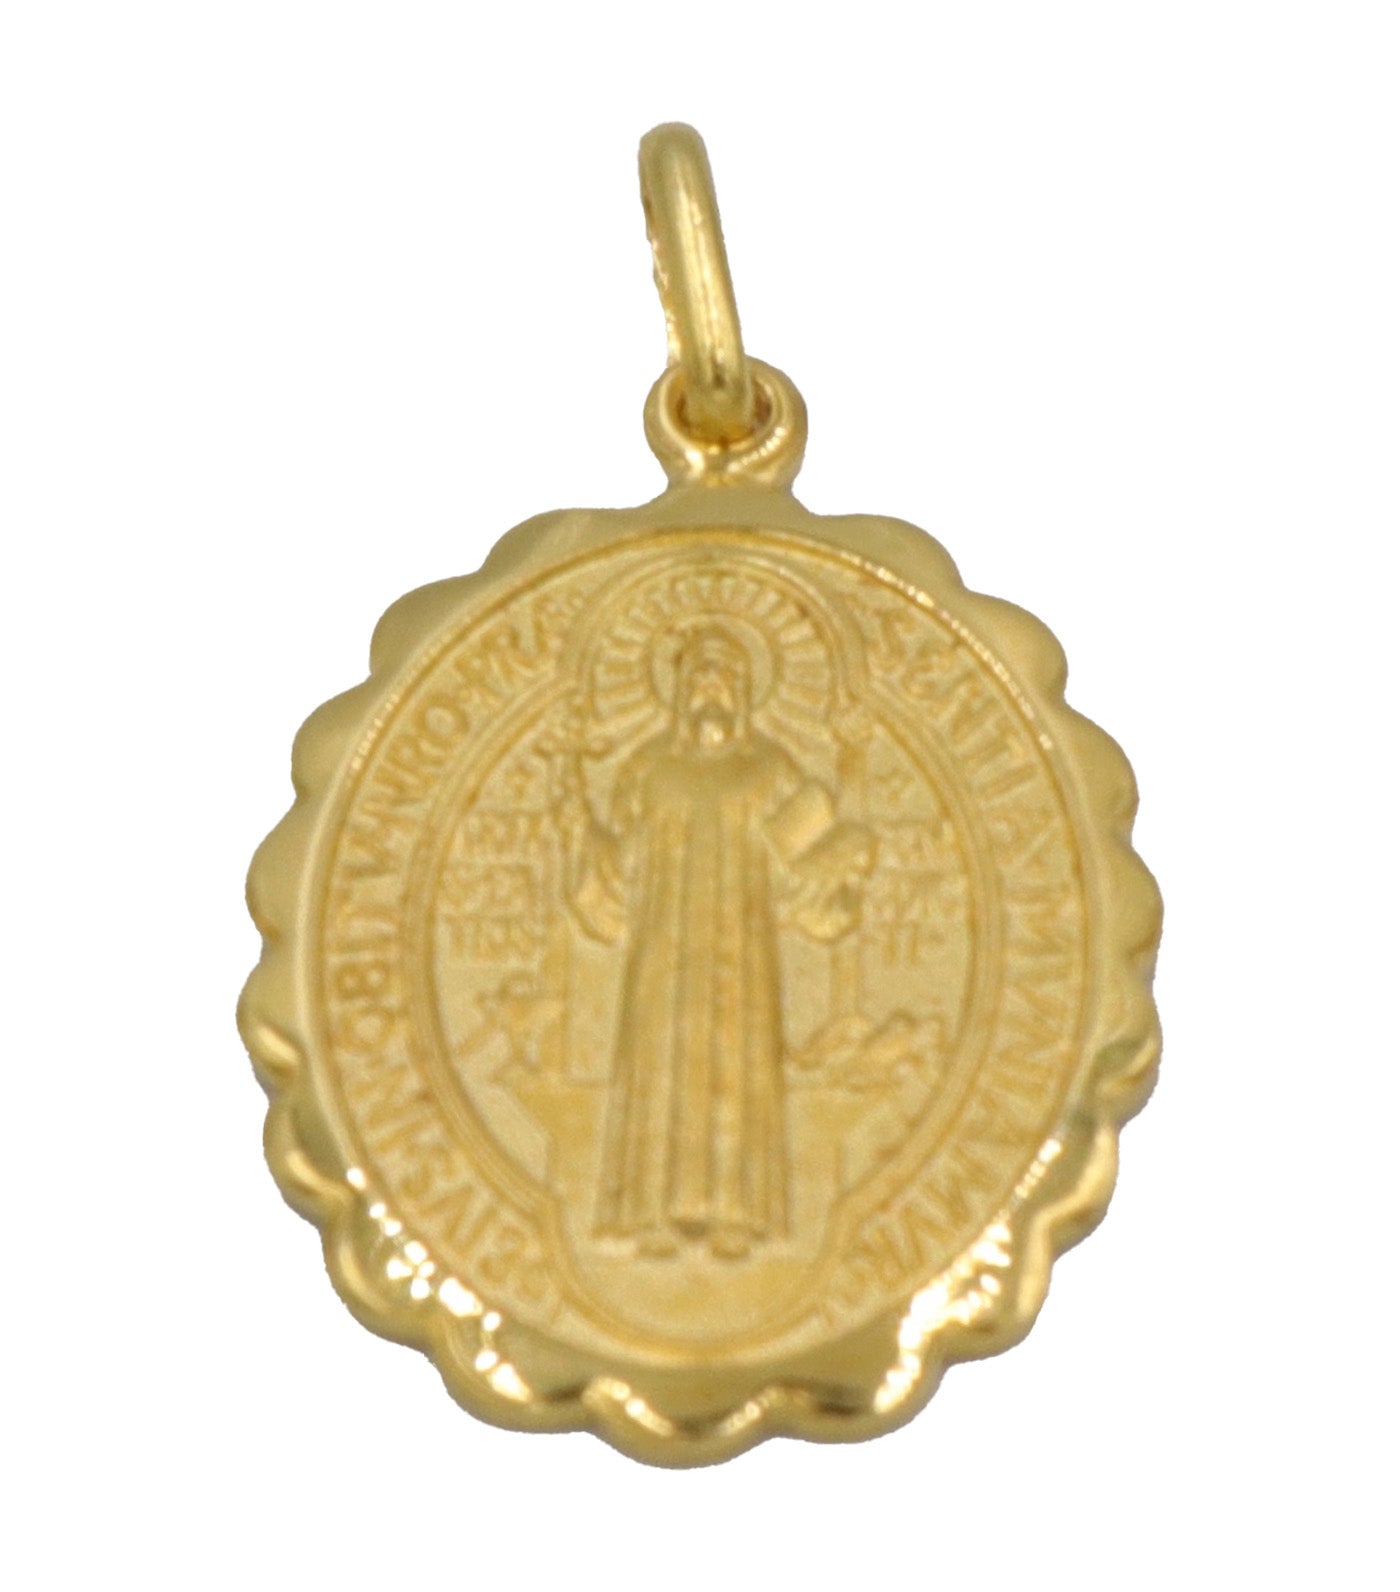 St. Benedict Oval Medal 18k Yellow Gold